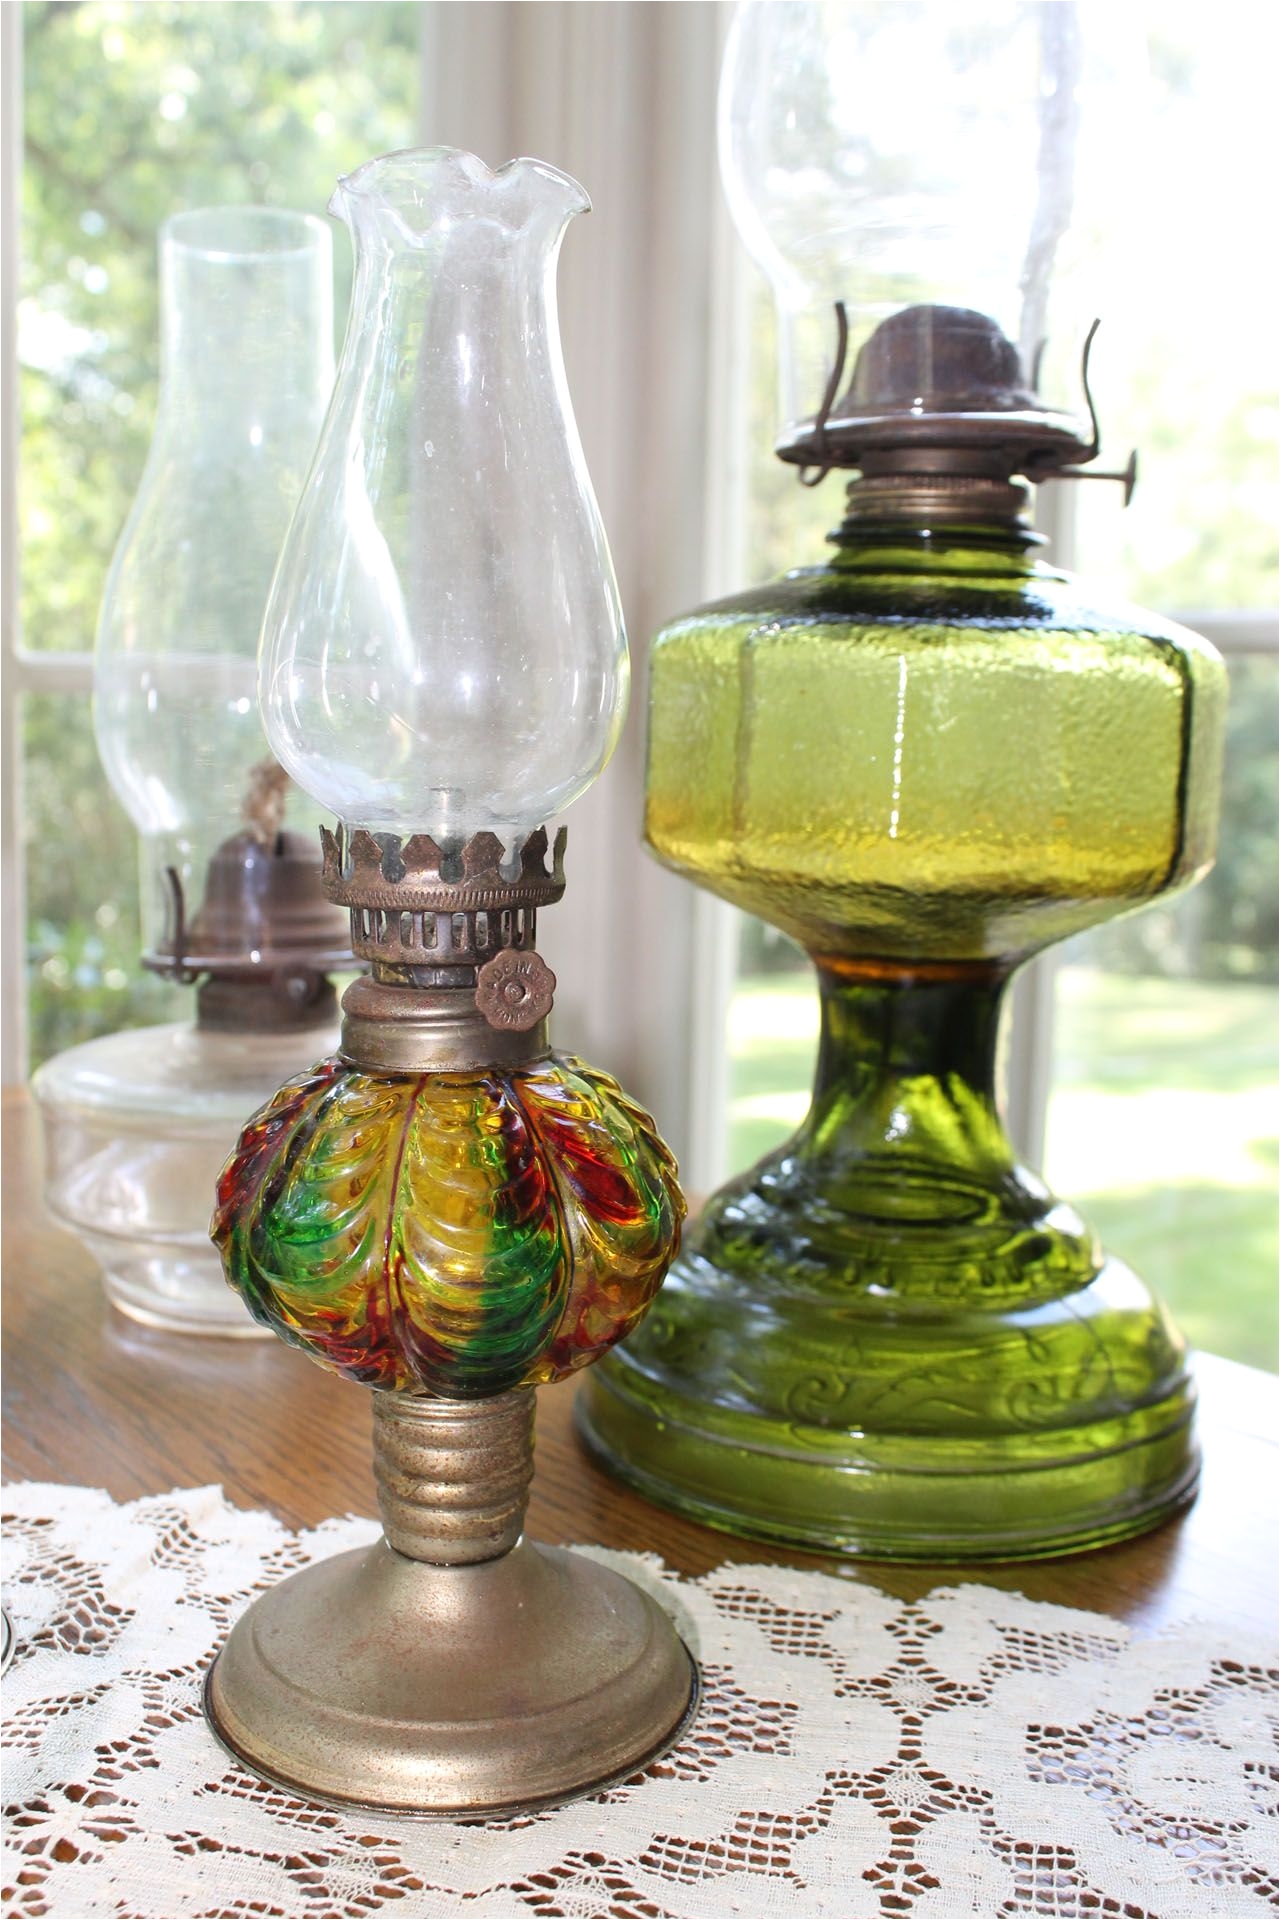 prepper we have oil lamps with colored glass and clear nice addition to table centerpieces i saw on your board with the black lanterns in center